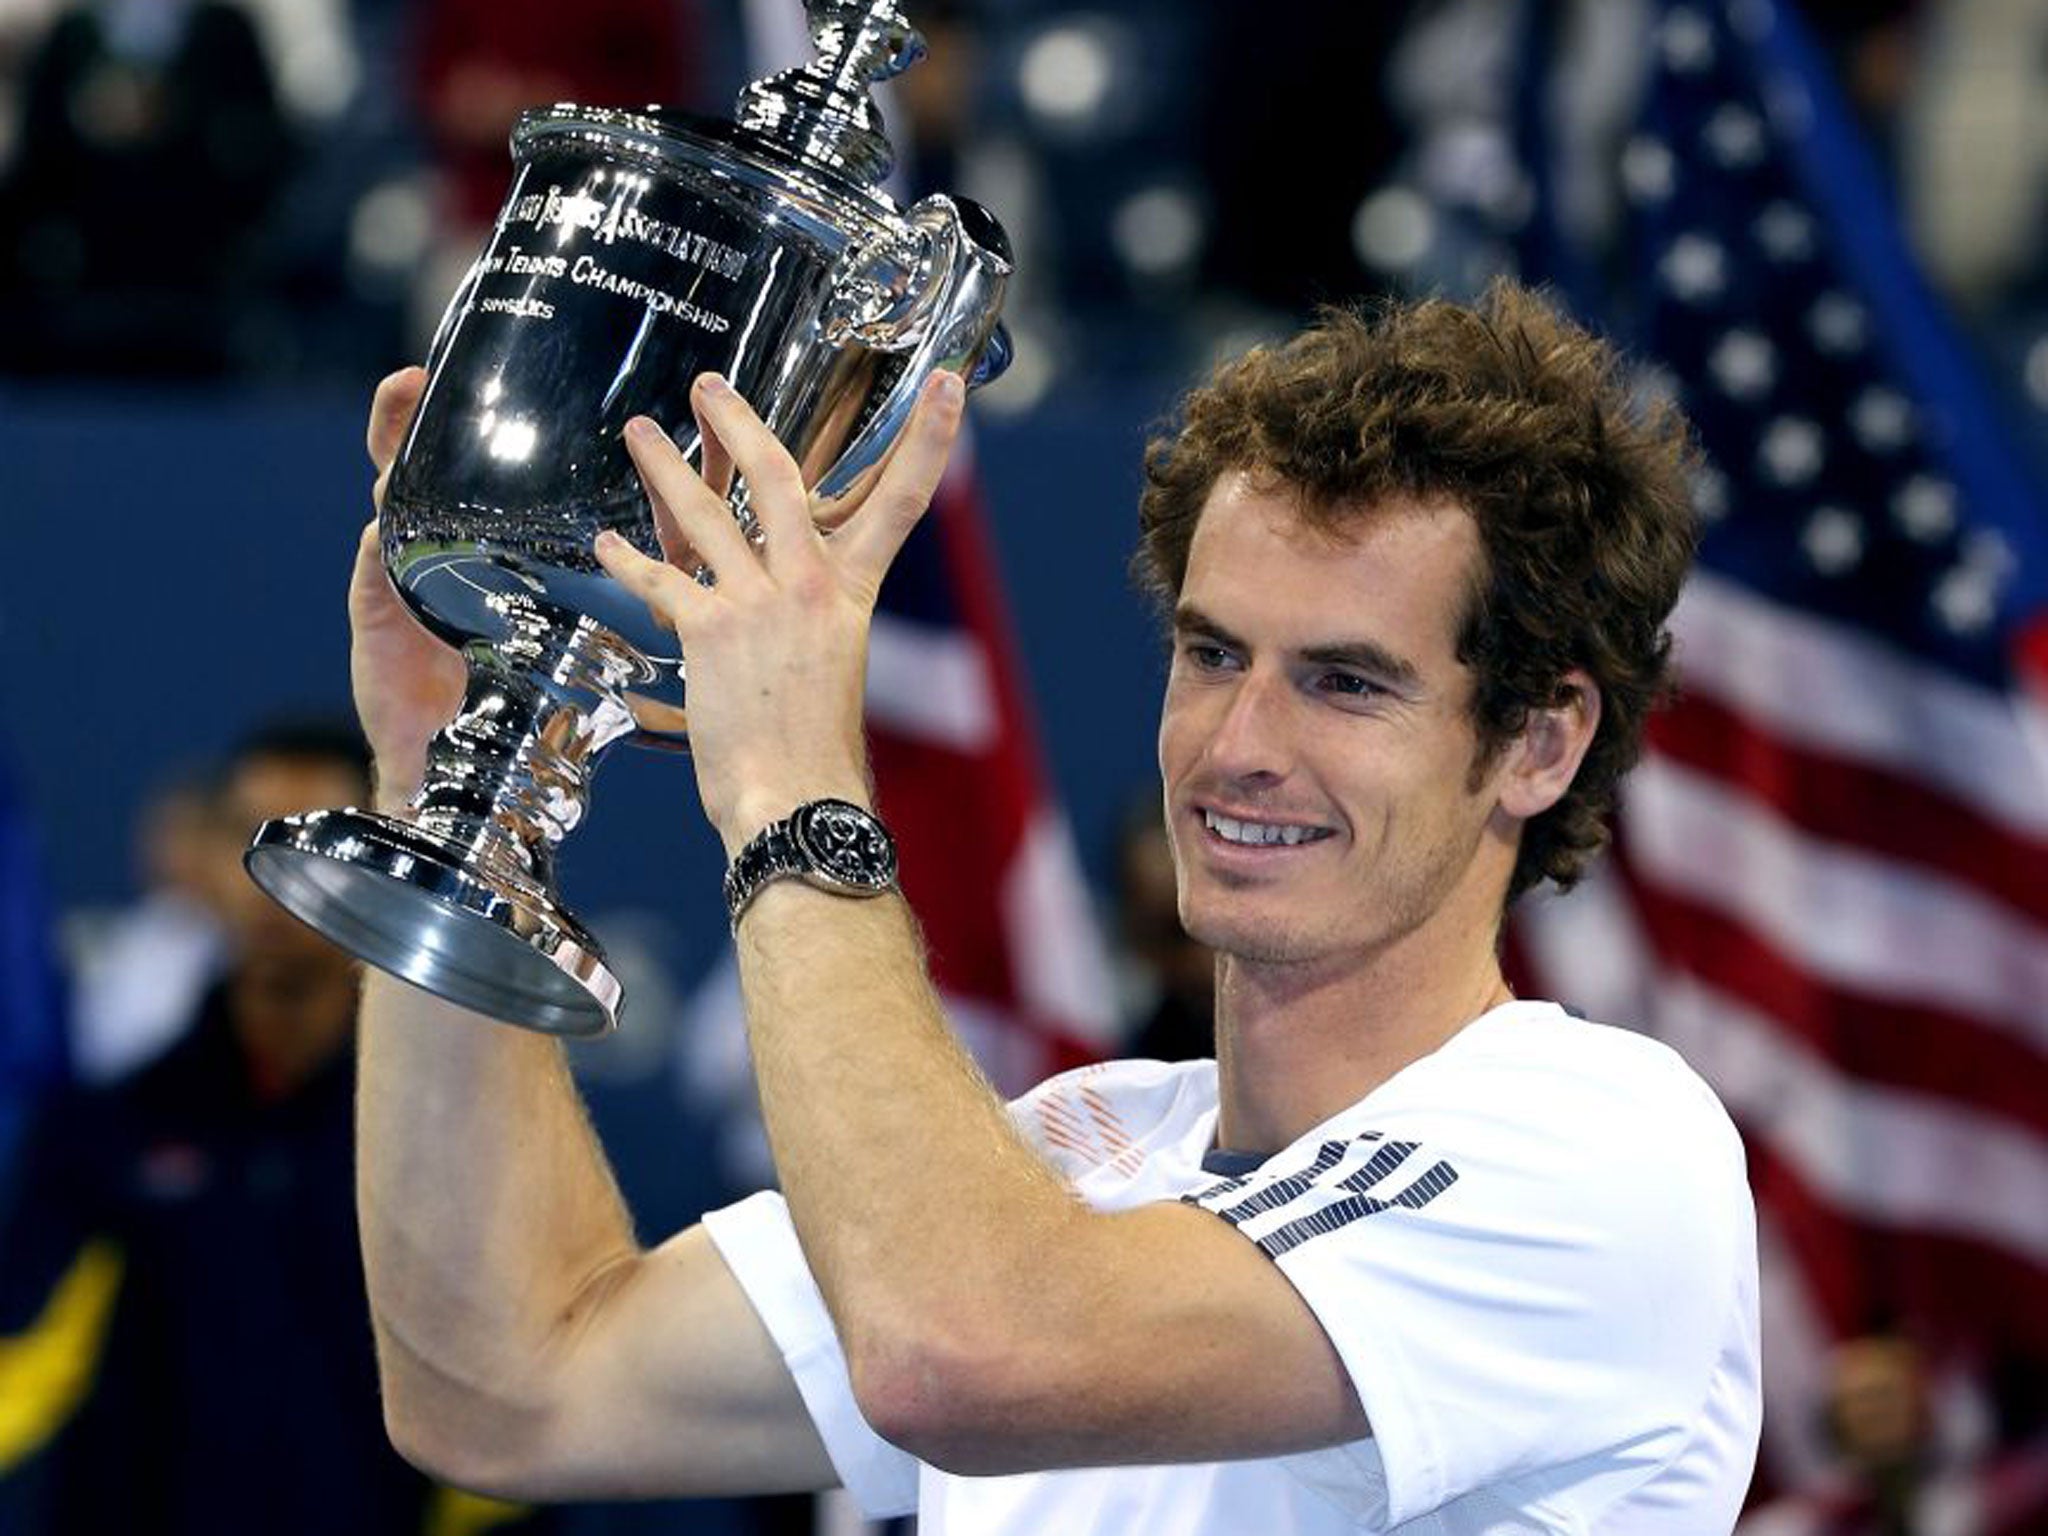 Andy Murray won the US Open having lost his previous four finals